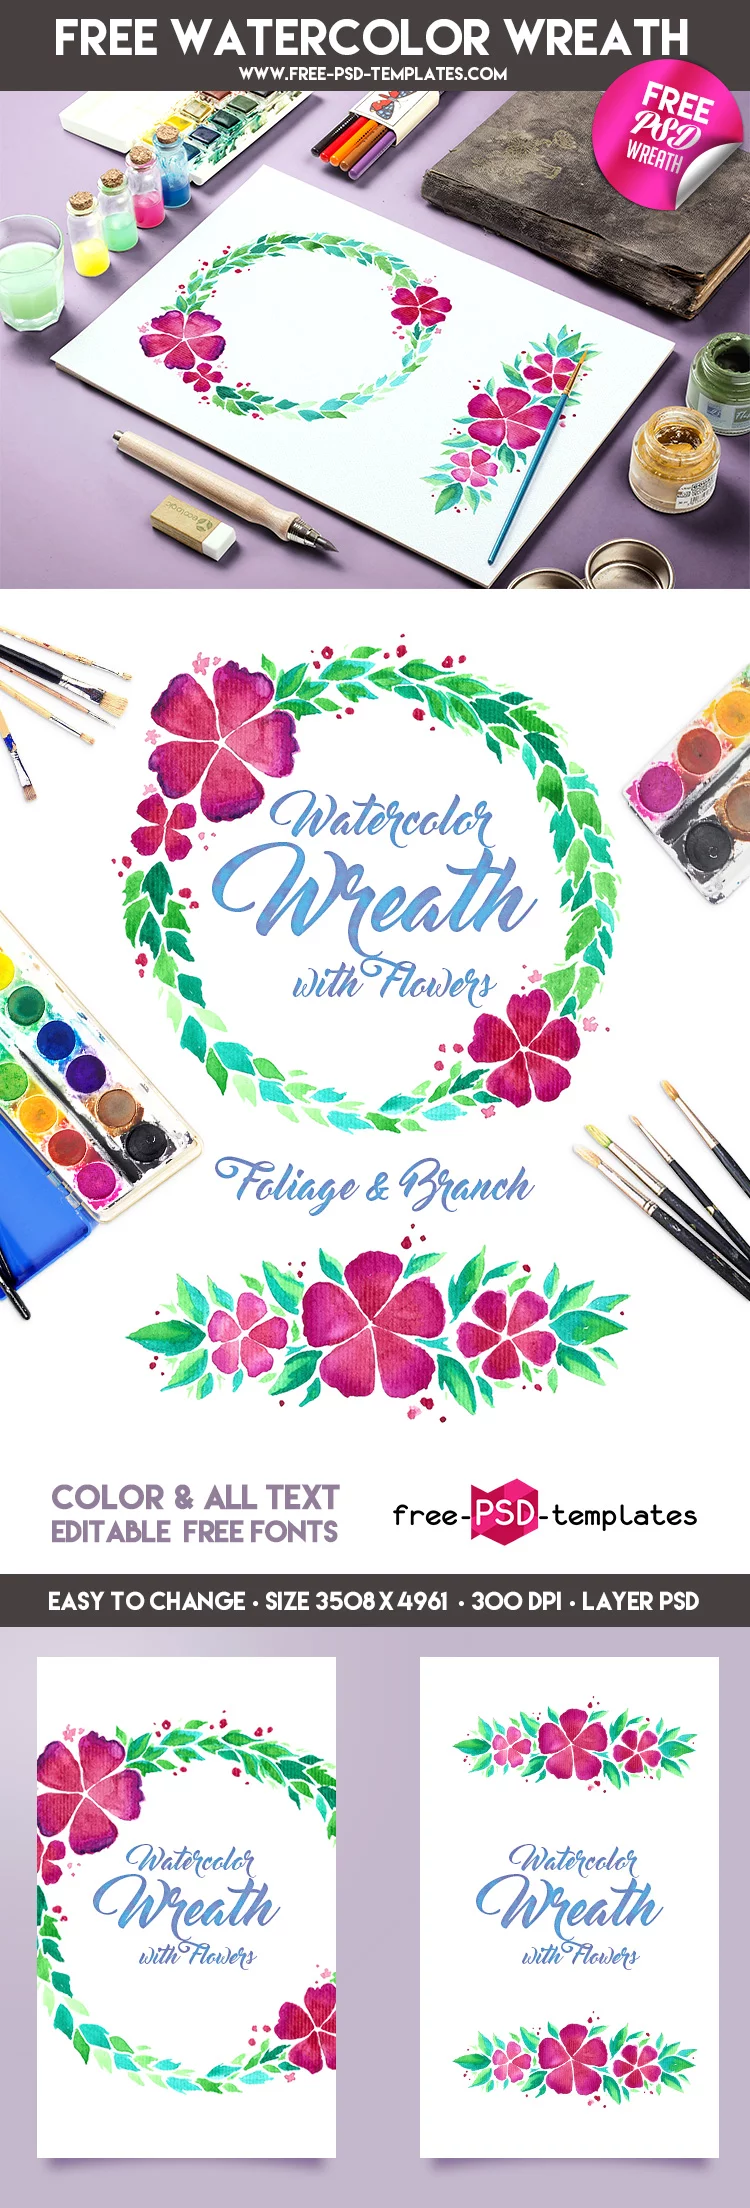 Preview_Free_Watercolor-Wreath